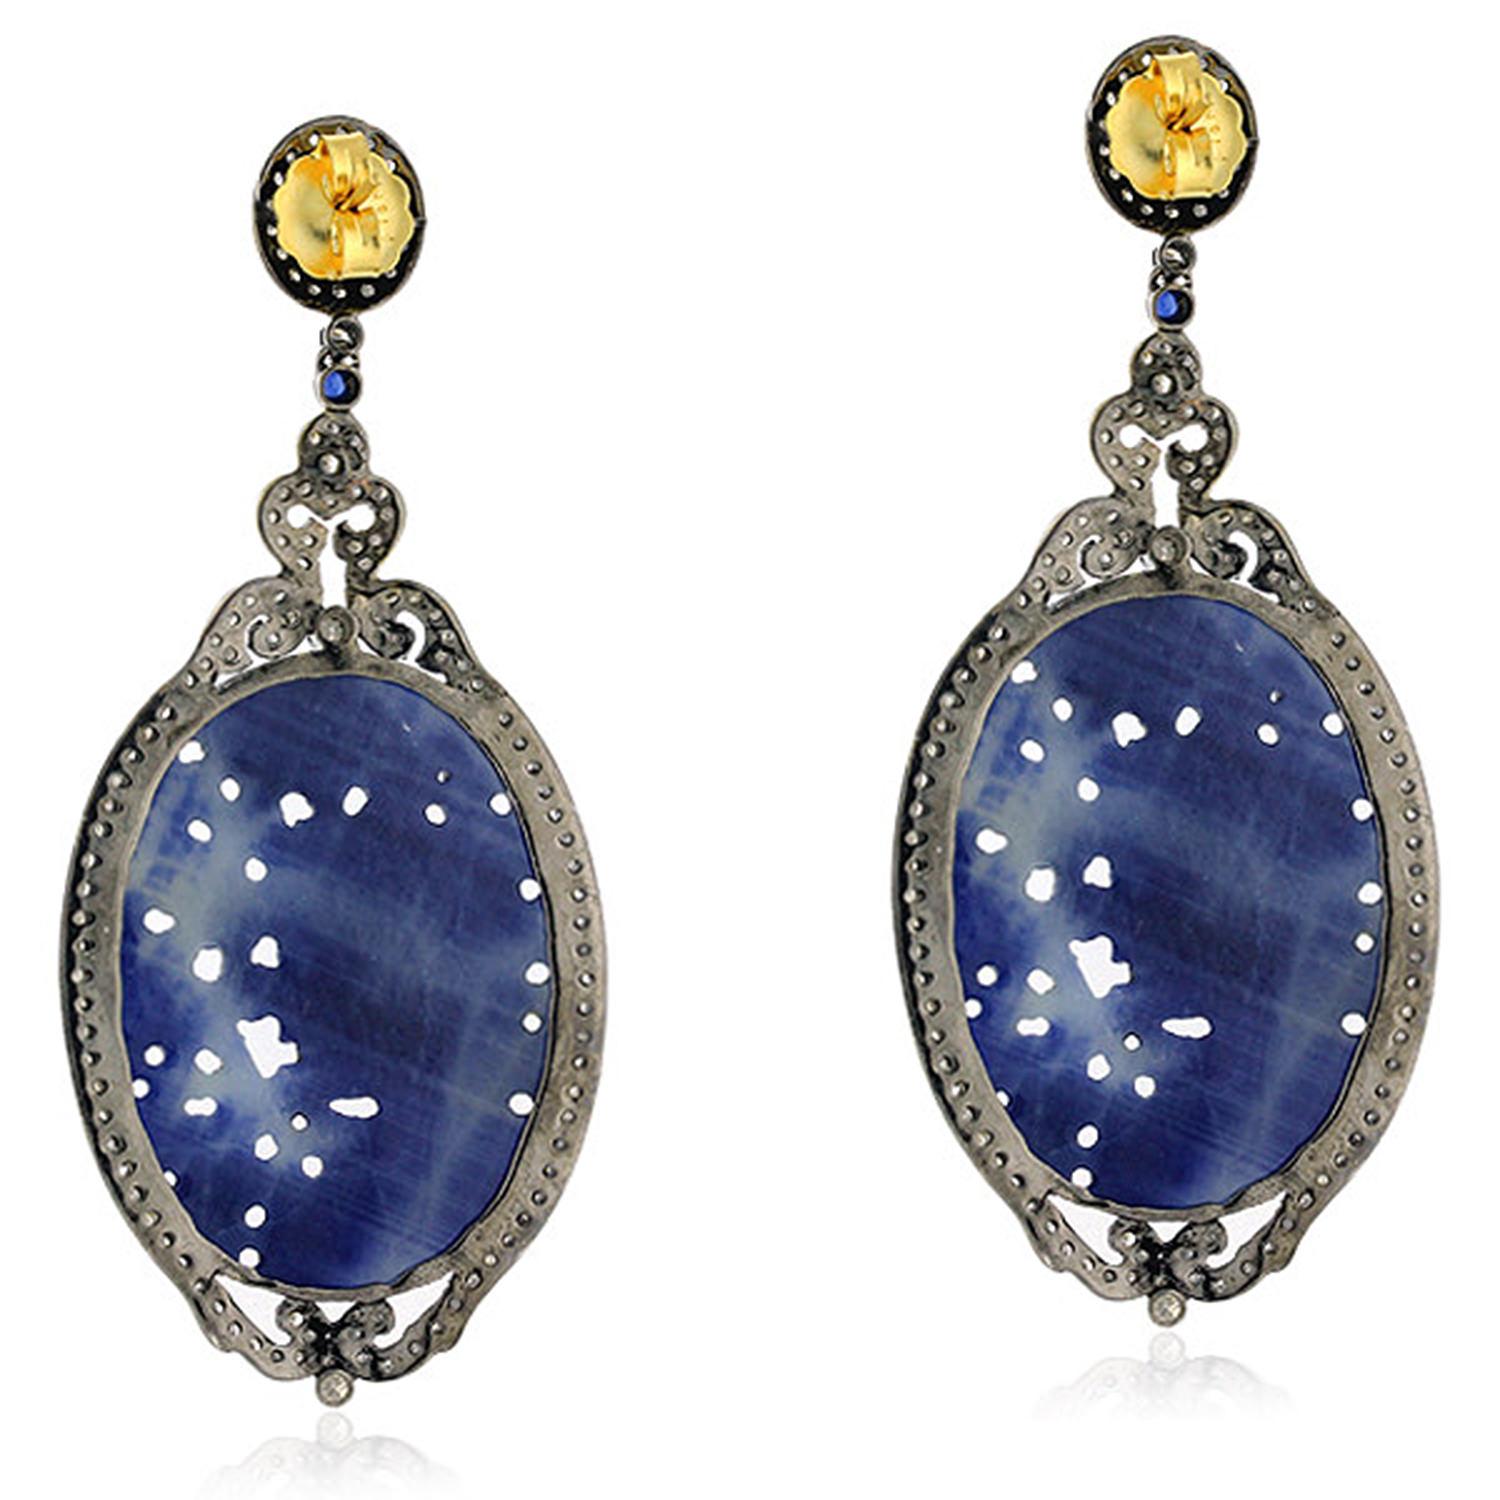 This Hand Craved lady face on this slice sapphire earring with diamonds around set in silver and gold is a very pretty earring.

Closure: Push Post

18K: 2.60gms
Diamond: 3.52cts
SiIver: 9.19gms
Blue Sapphire: 119.41cts